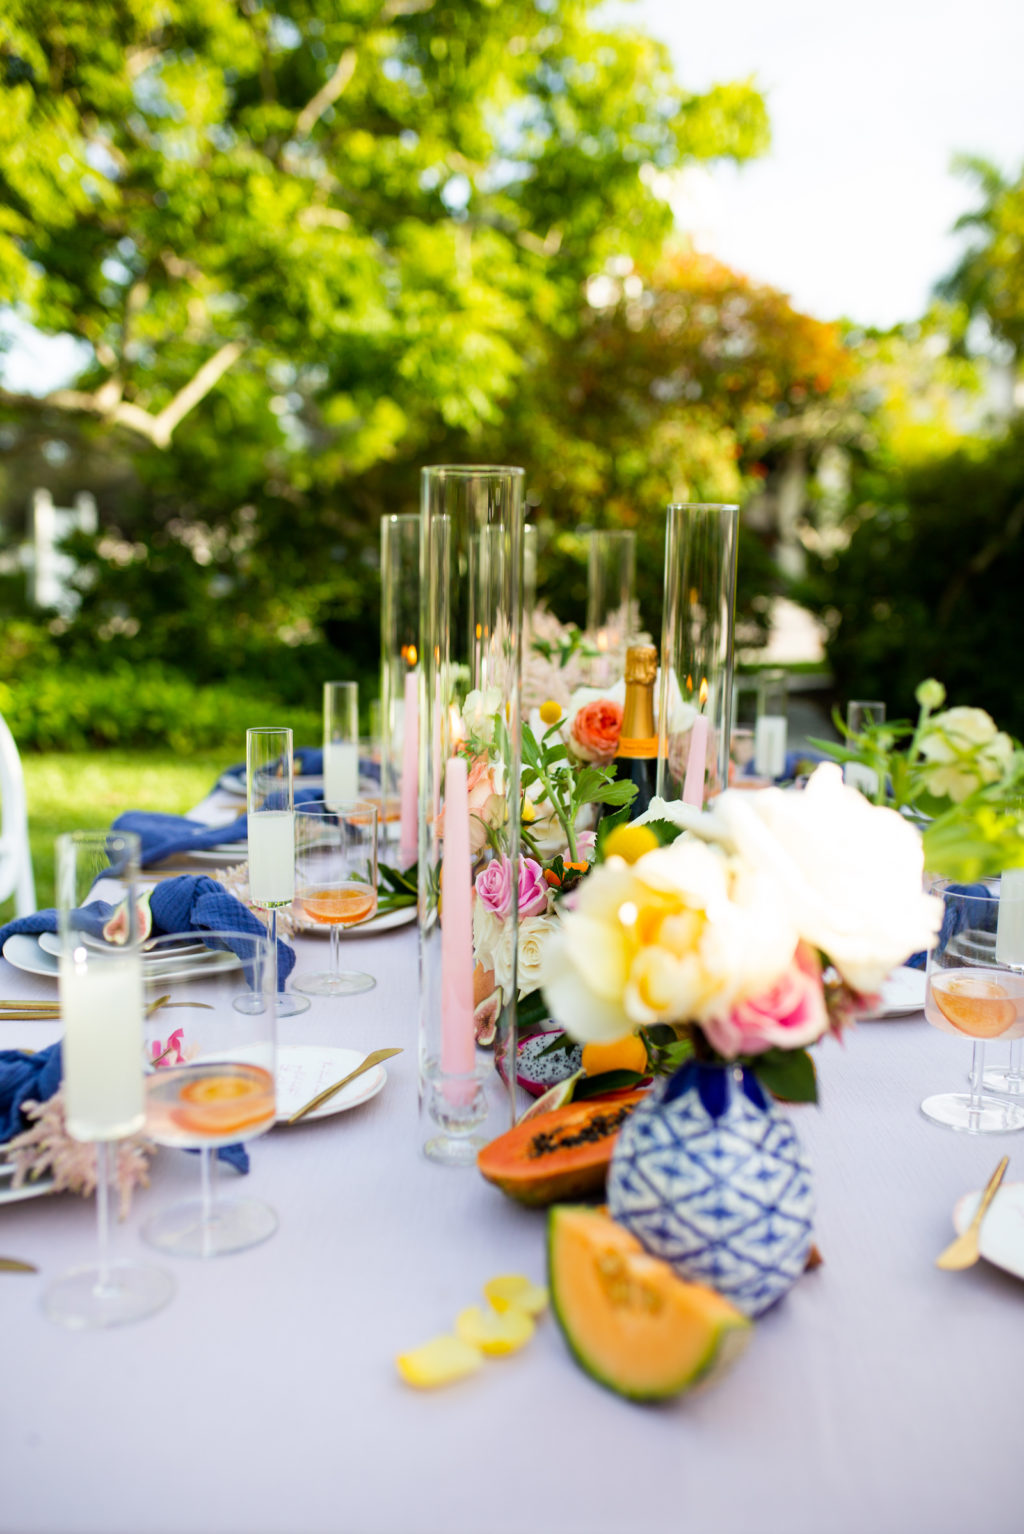 Tampa Bay Garden Inspired Intimate Wedding Ceremony at Sarasota Garden Club, Florida Micro Wedding Style Shoot with Silver Linens, Citrus Orange and Peach Florals, Pops of Dark Blue Blue, Gold Flatware, Light Pink Florals in Outdoor Venue